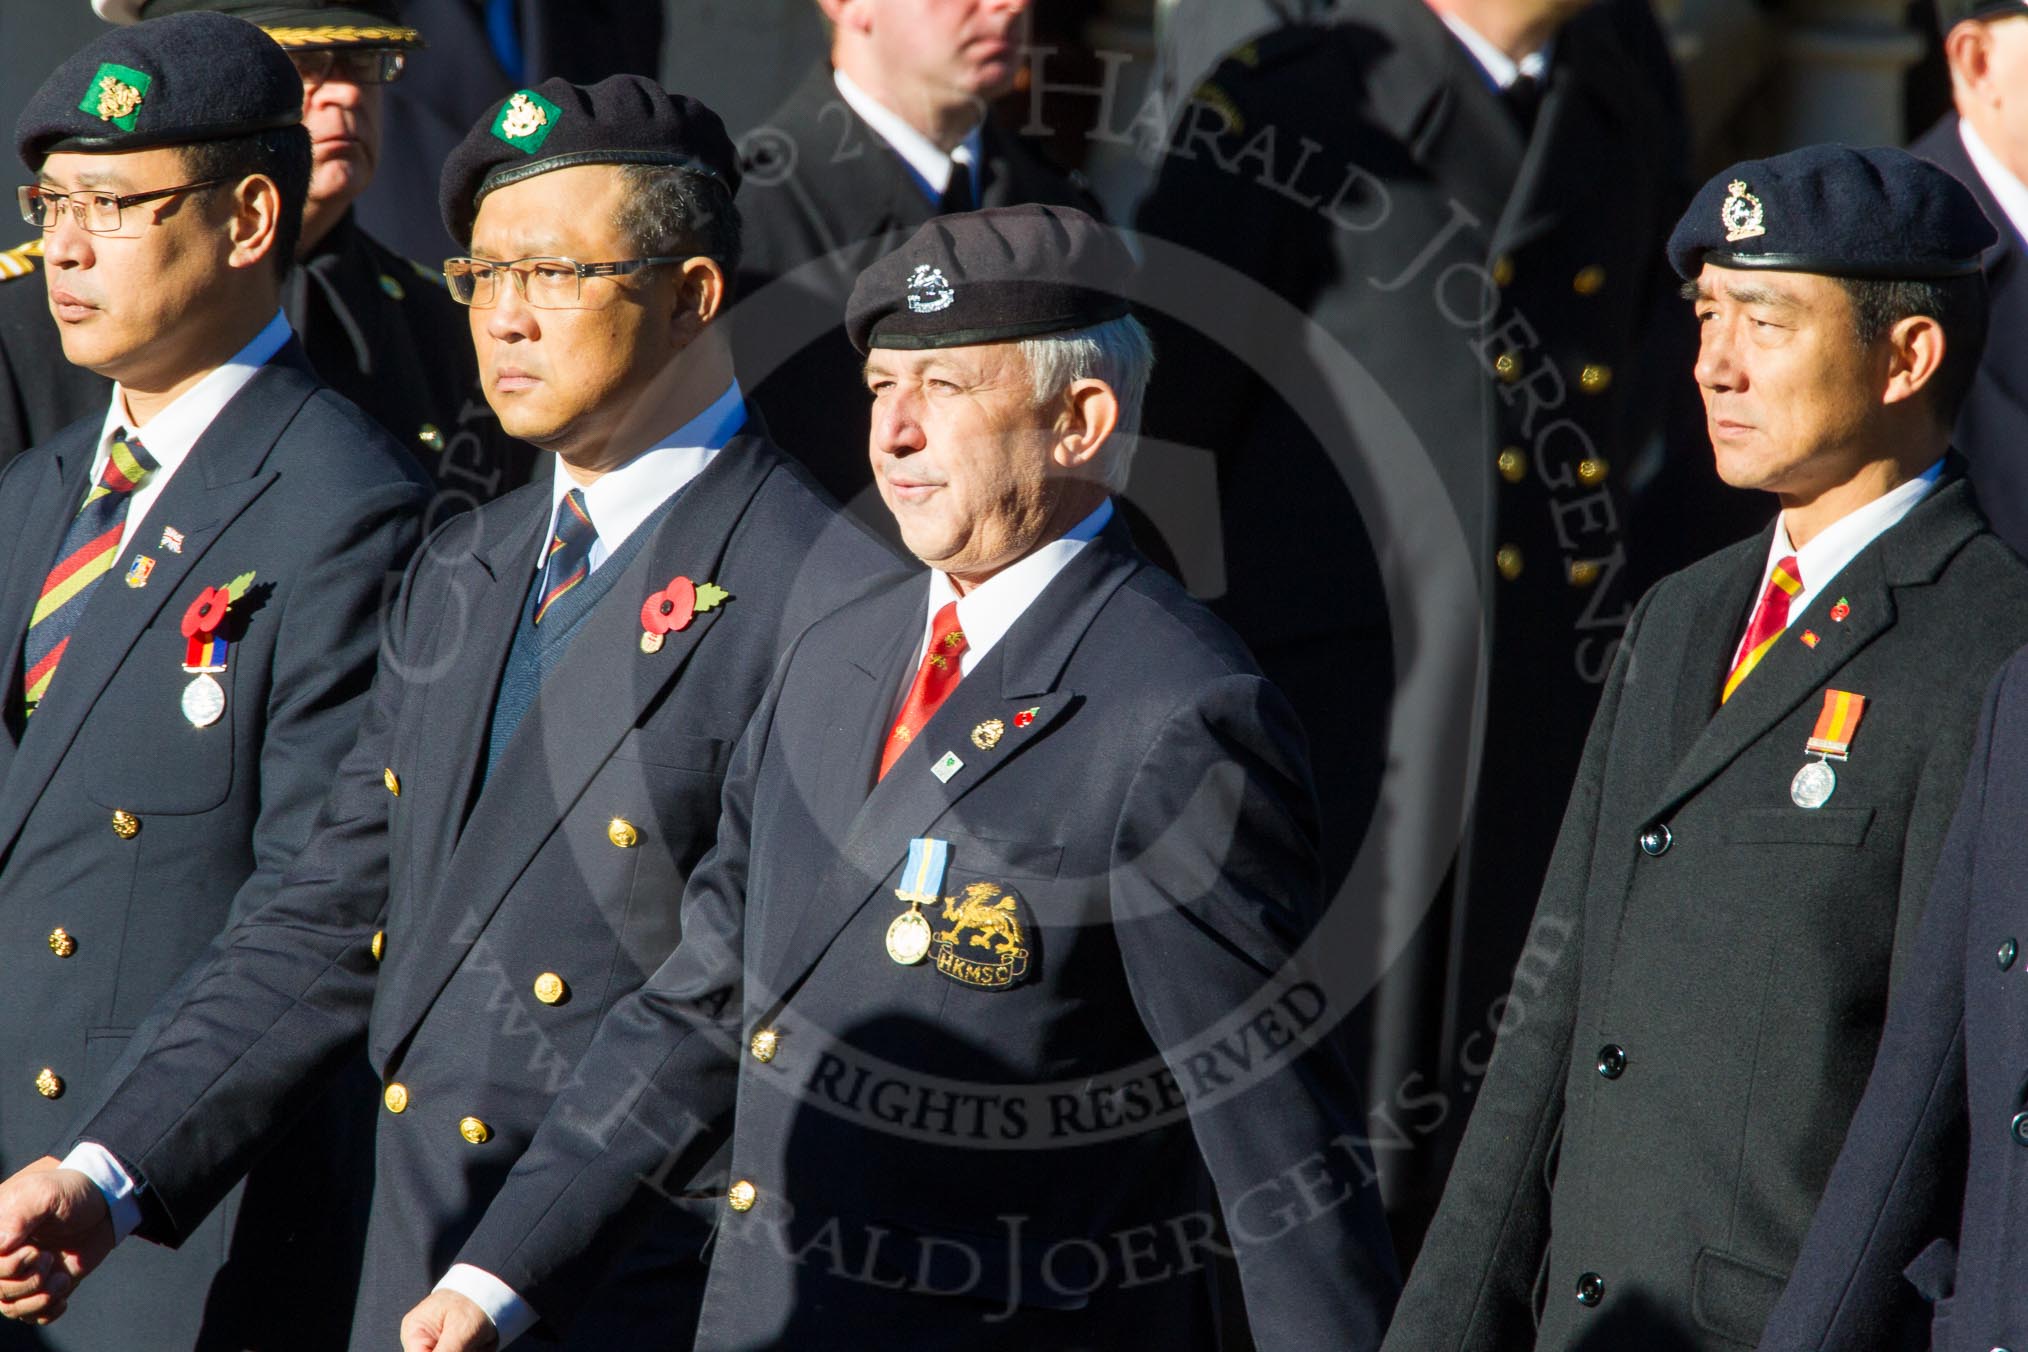 Remembrance Sunday Cenotaph March Past 2013: D10 - Hong Kong Military Service Corps..
Press stand opposite the Foreign Office building, Whitehall, London SW1,
London,
Greater London,
United Kingdom,
on 10 November 2013 at 11:39, image #83